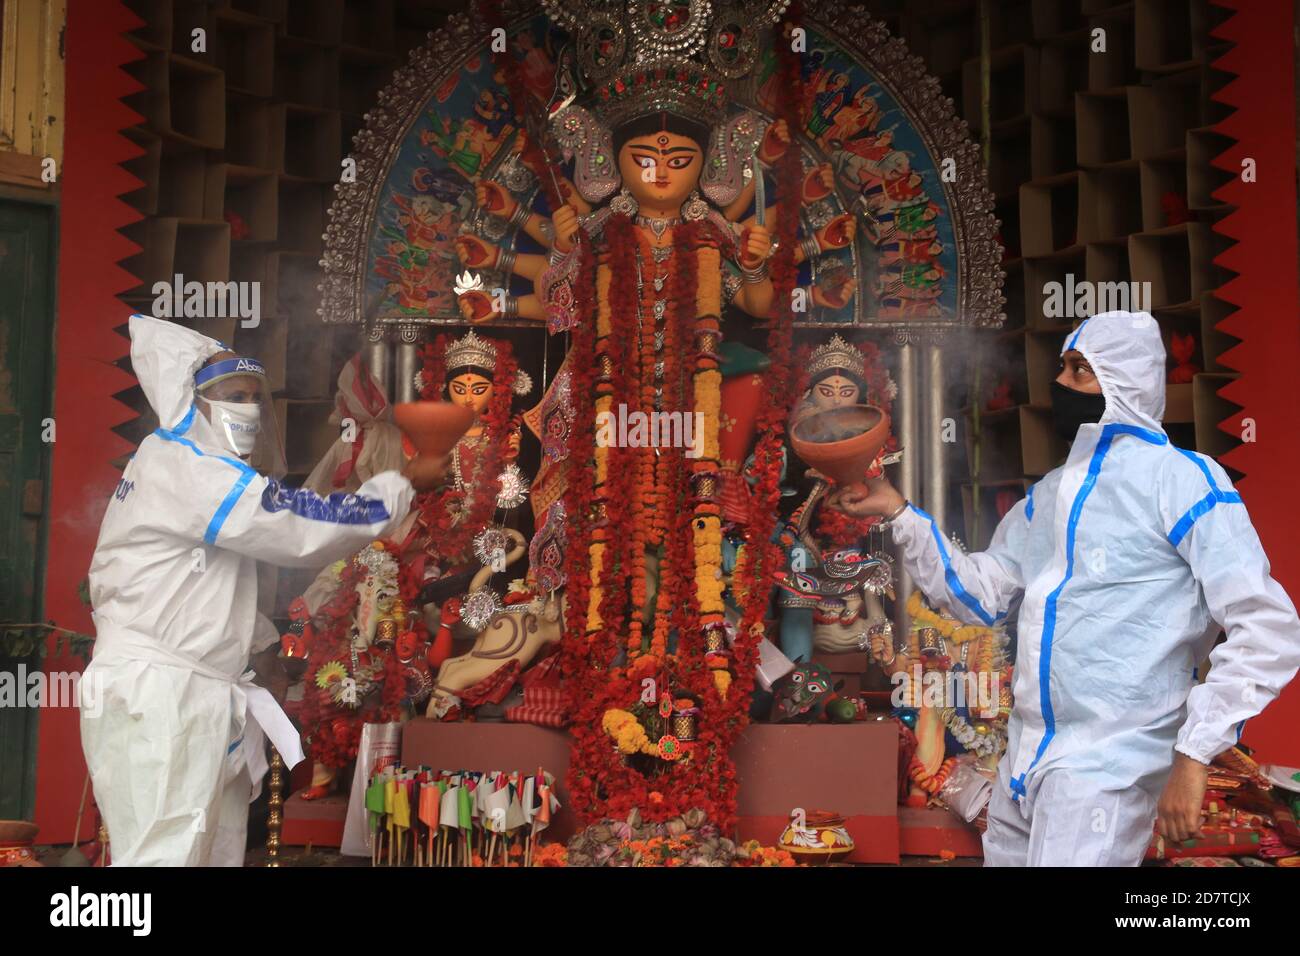 Kolkata, India. 25th Oct, 2020. Hindu devotees wearing PPE perform the traditional dance of Dhunuchi in front of Hindu goddess Durga idol during Durga Puja Festival in Kolkata. About 90 per cent of Covid patients have recovered in India so far, the Health Ministry said this morning, adding that the country has logged over 78.64 lakh cases since the beginning of the pandemic. In the last 24 hours, the country reported 50,129 new infections; 578 deaths in a day have pushed the total Covid-linked fatalities to 1, 18,534. India is the second worst-hit country in the world by the pandemic after the Stock Photo